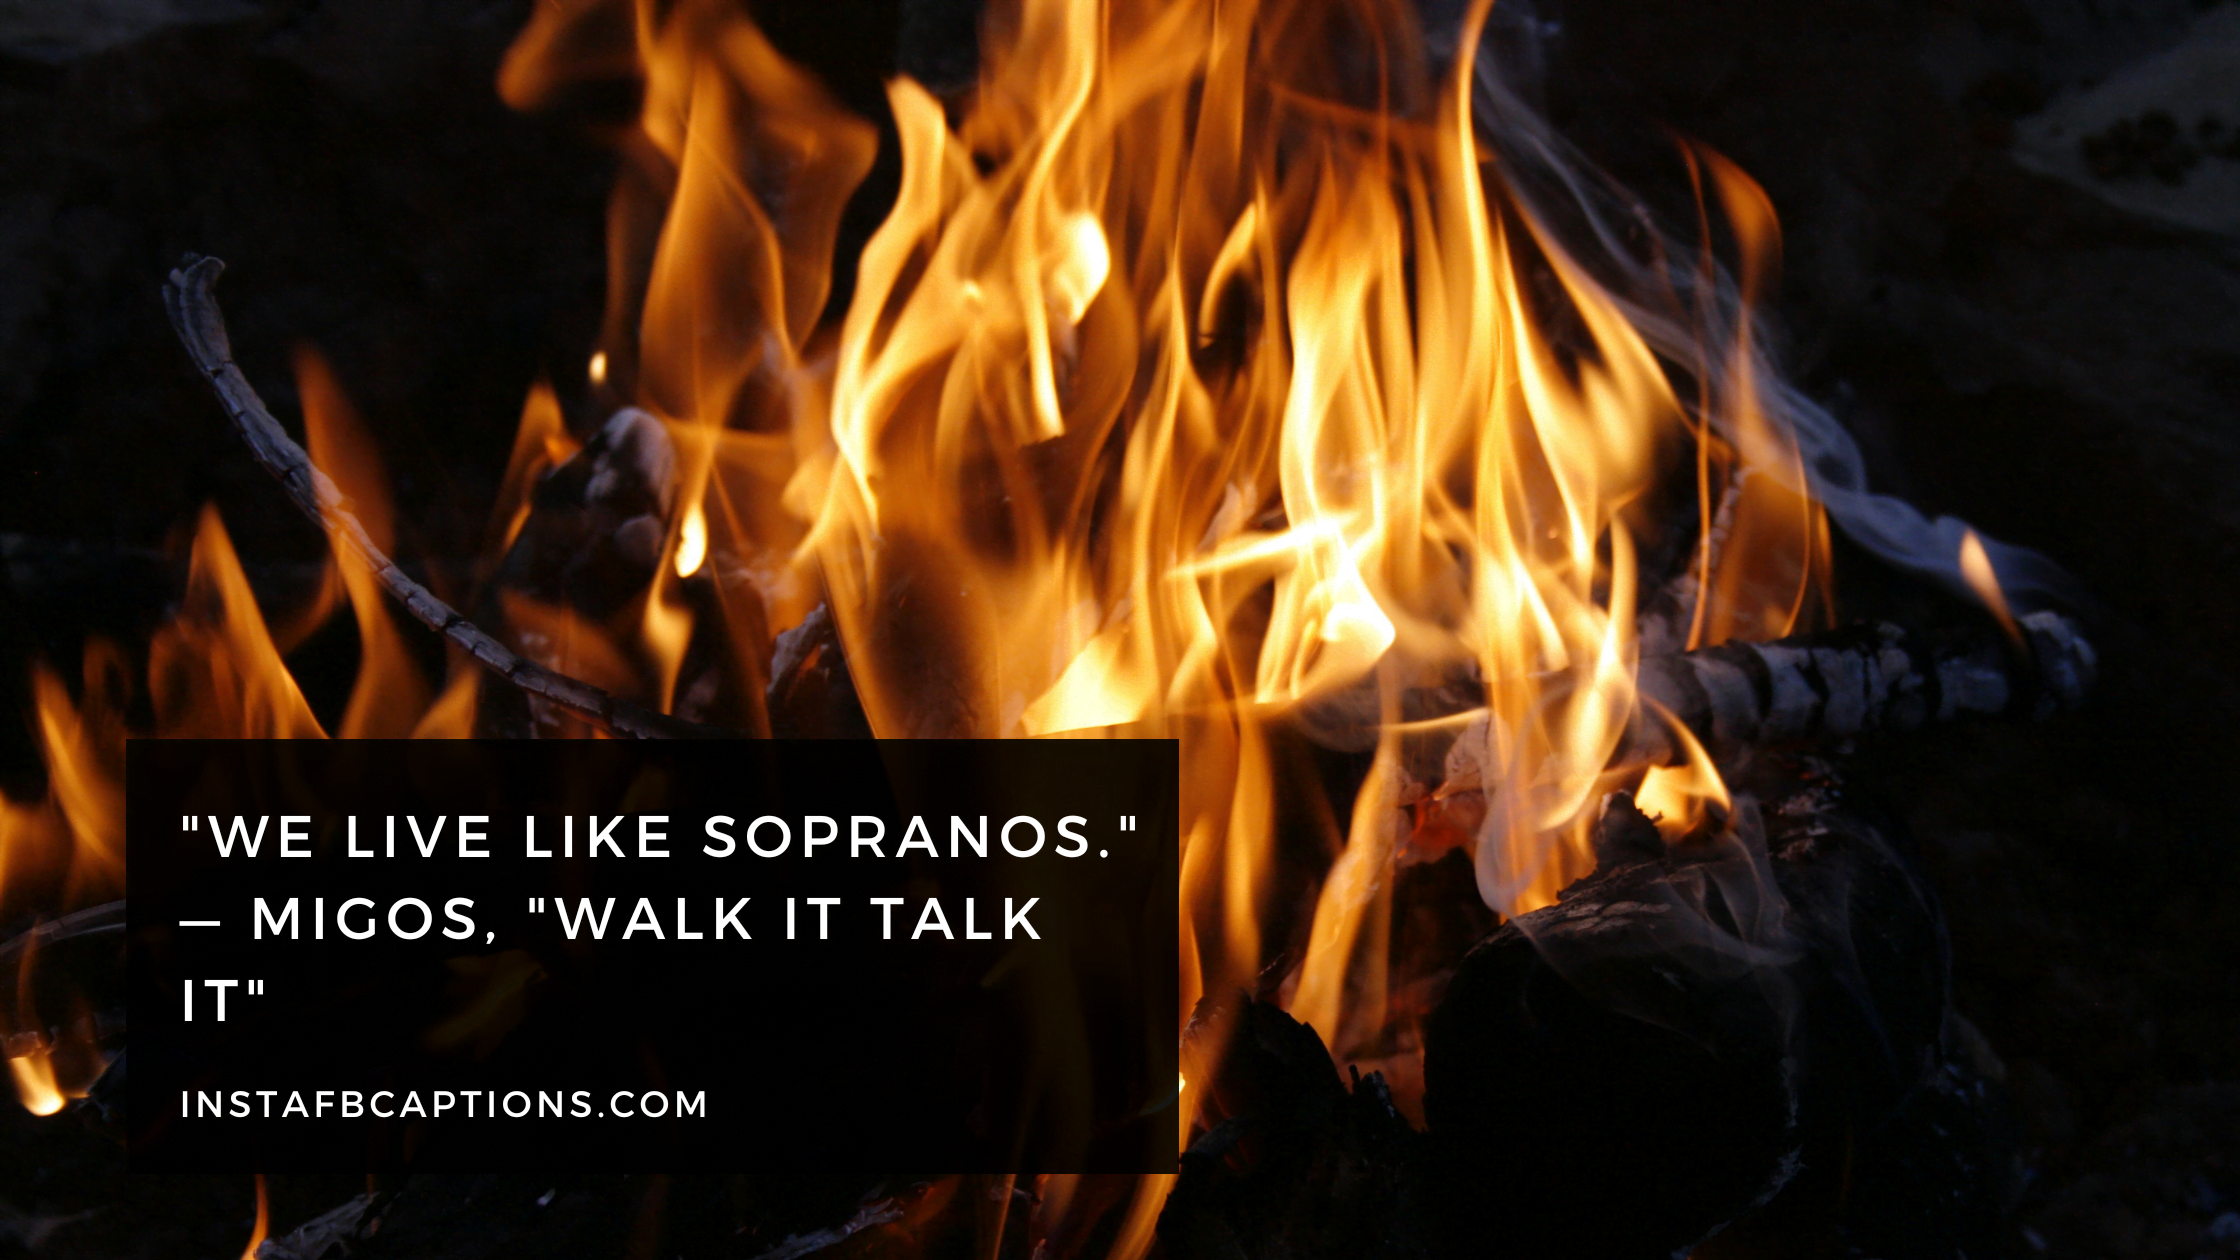 "We live like Sopranos." — Migos, "Walk It Talk It" fire instagram captions - Fire Instagram Captions from Rap Songs  - [NEW] Fire Captions Quotes For Instagram in 2023